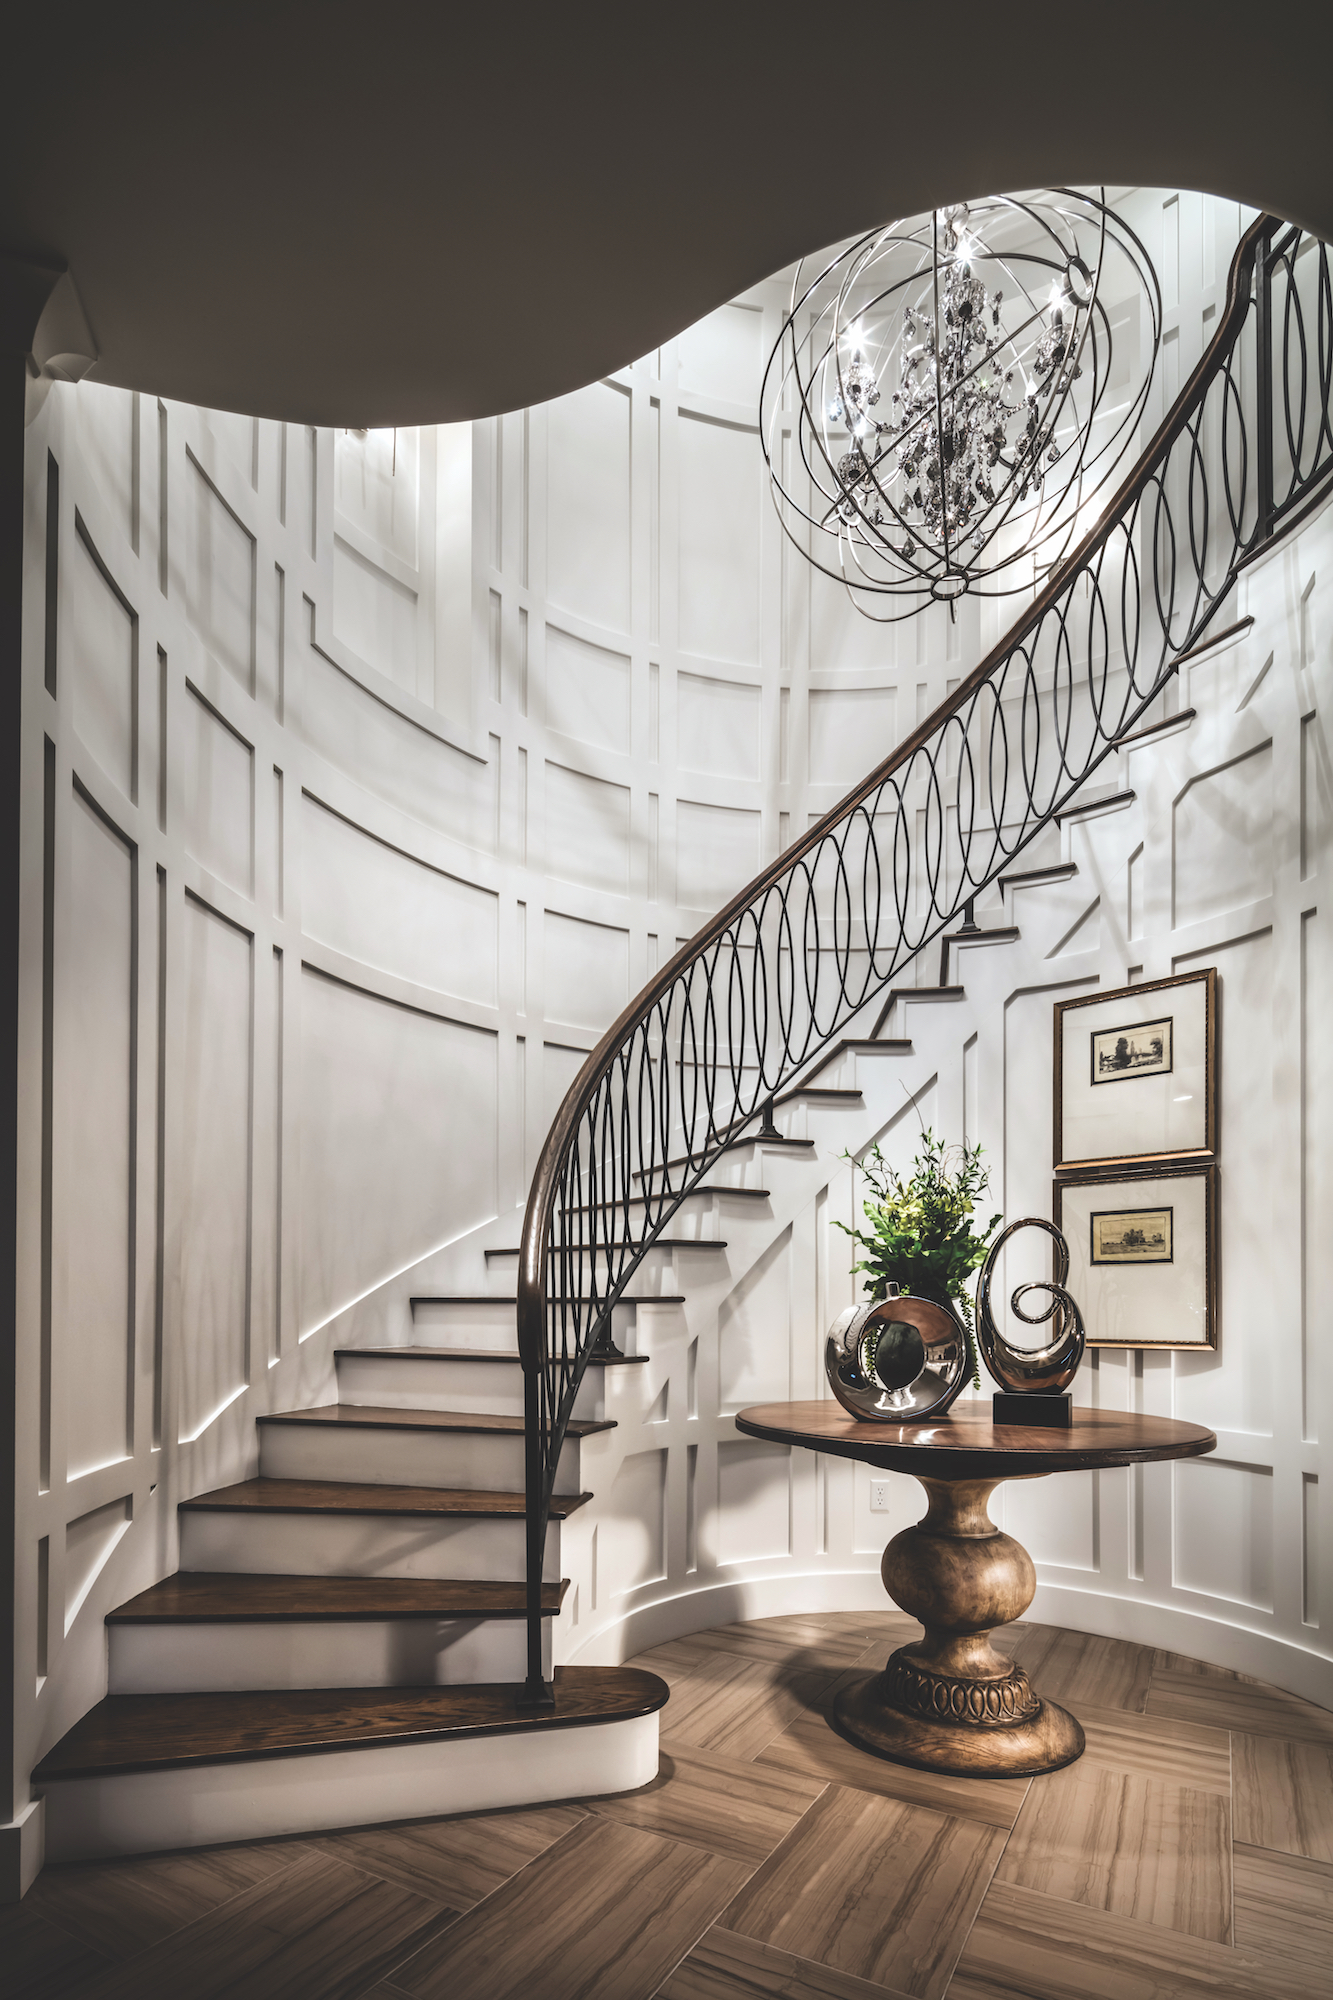 Elegant staircase in a house entrance.